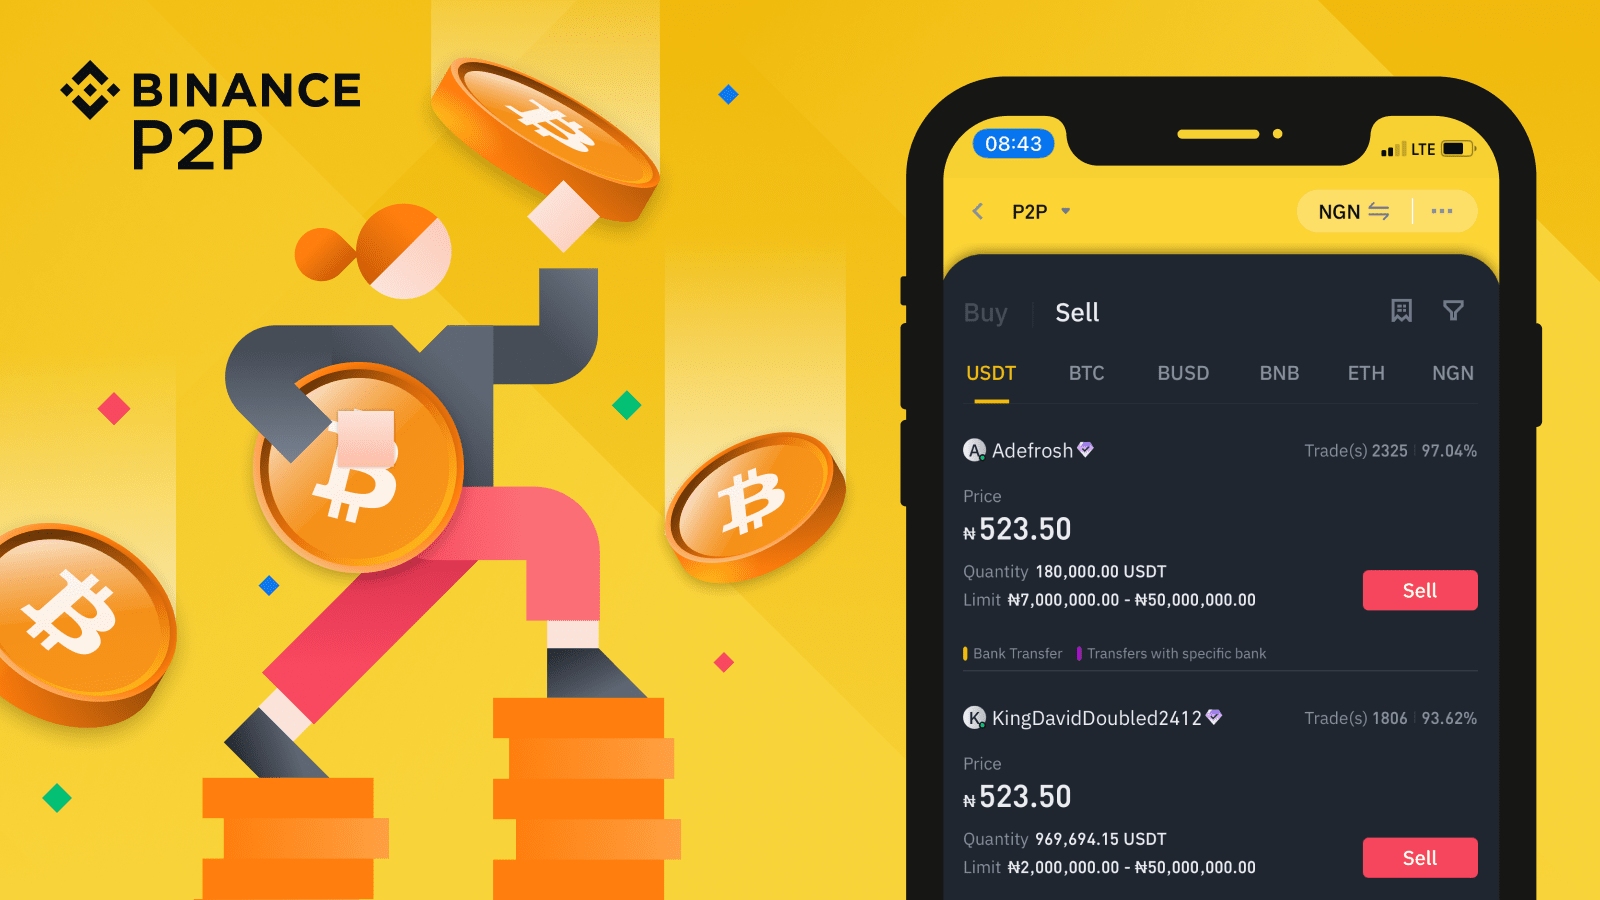 Buy and sell Bitcoin on P2P